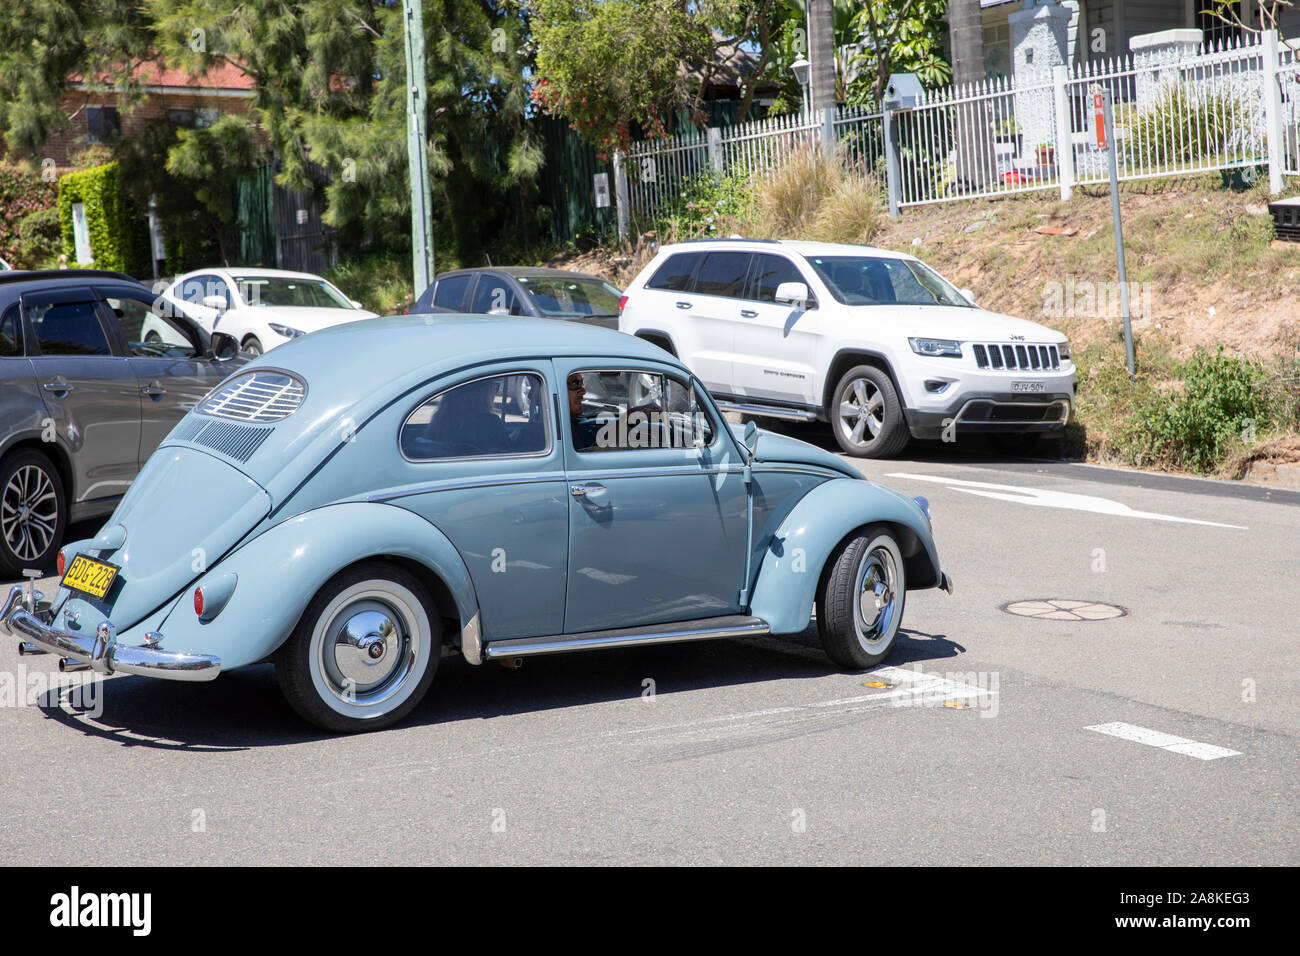 Classic Volkswagen beetle car in light blue driving on a Sydney road,Australia Stock Photo